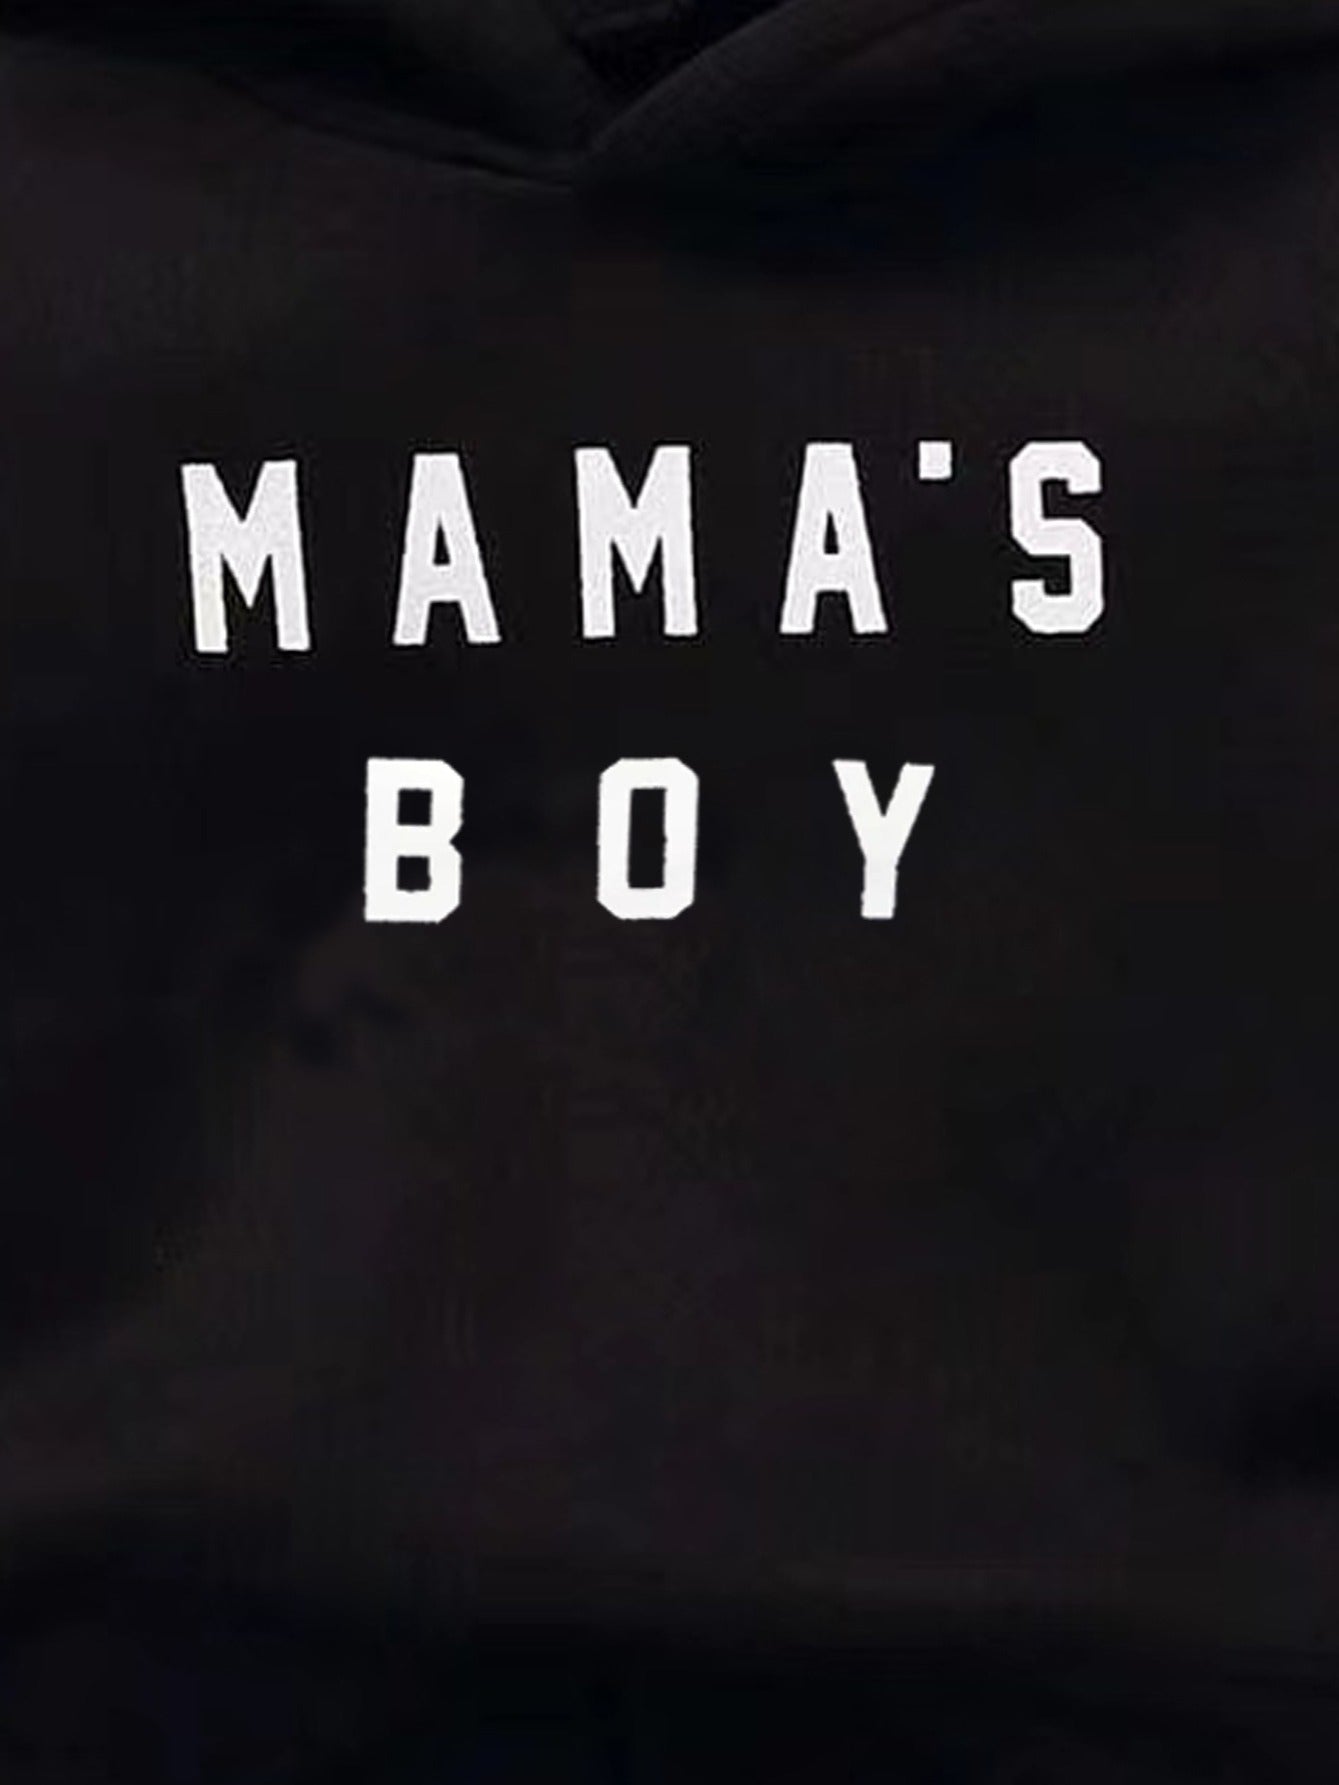 "MAMA'S BOY" Thermal Hoodie and Sweatpants Set for Baby Boys